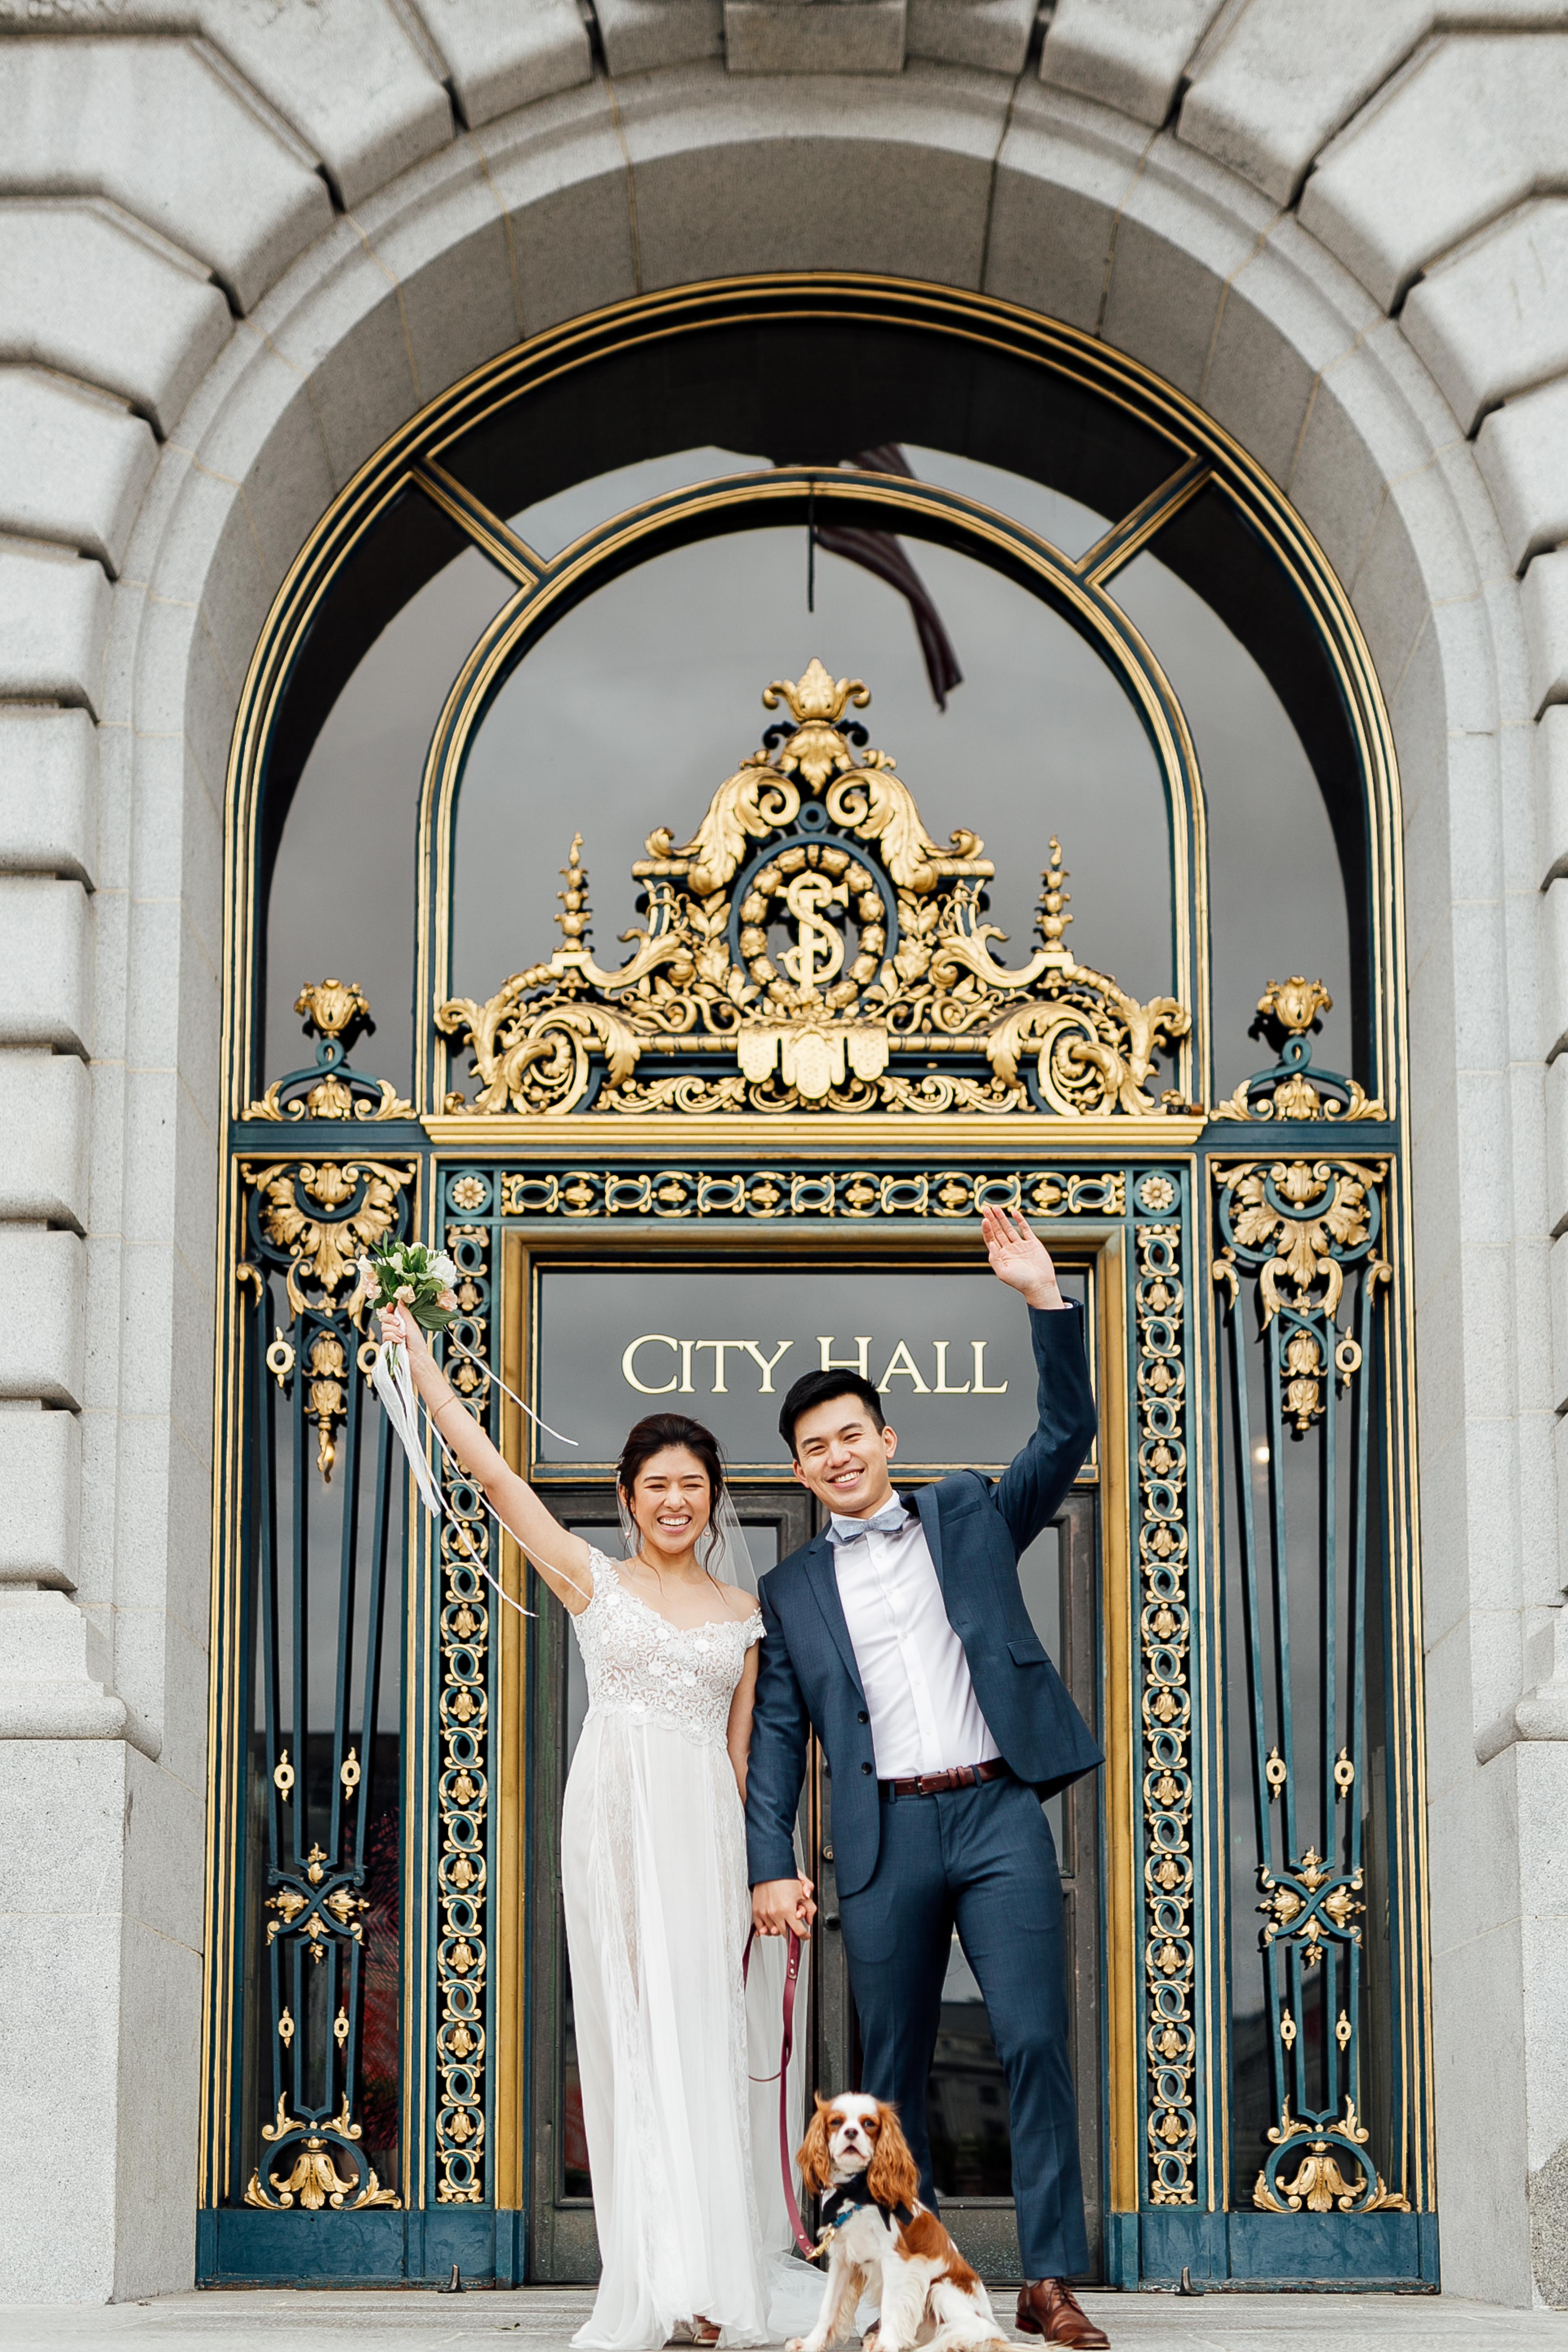 Bride, groom, and dog rejoice in front of City Hall doors